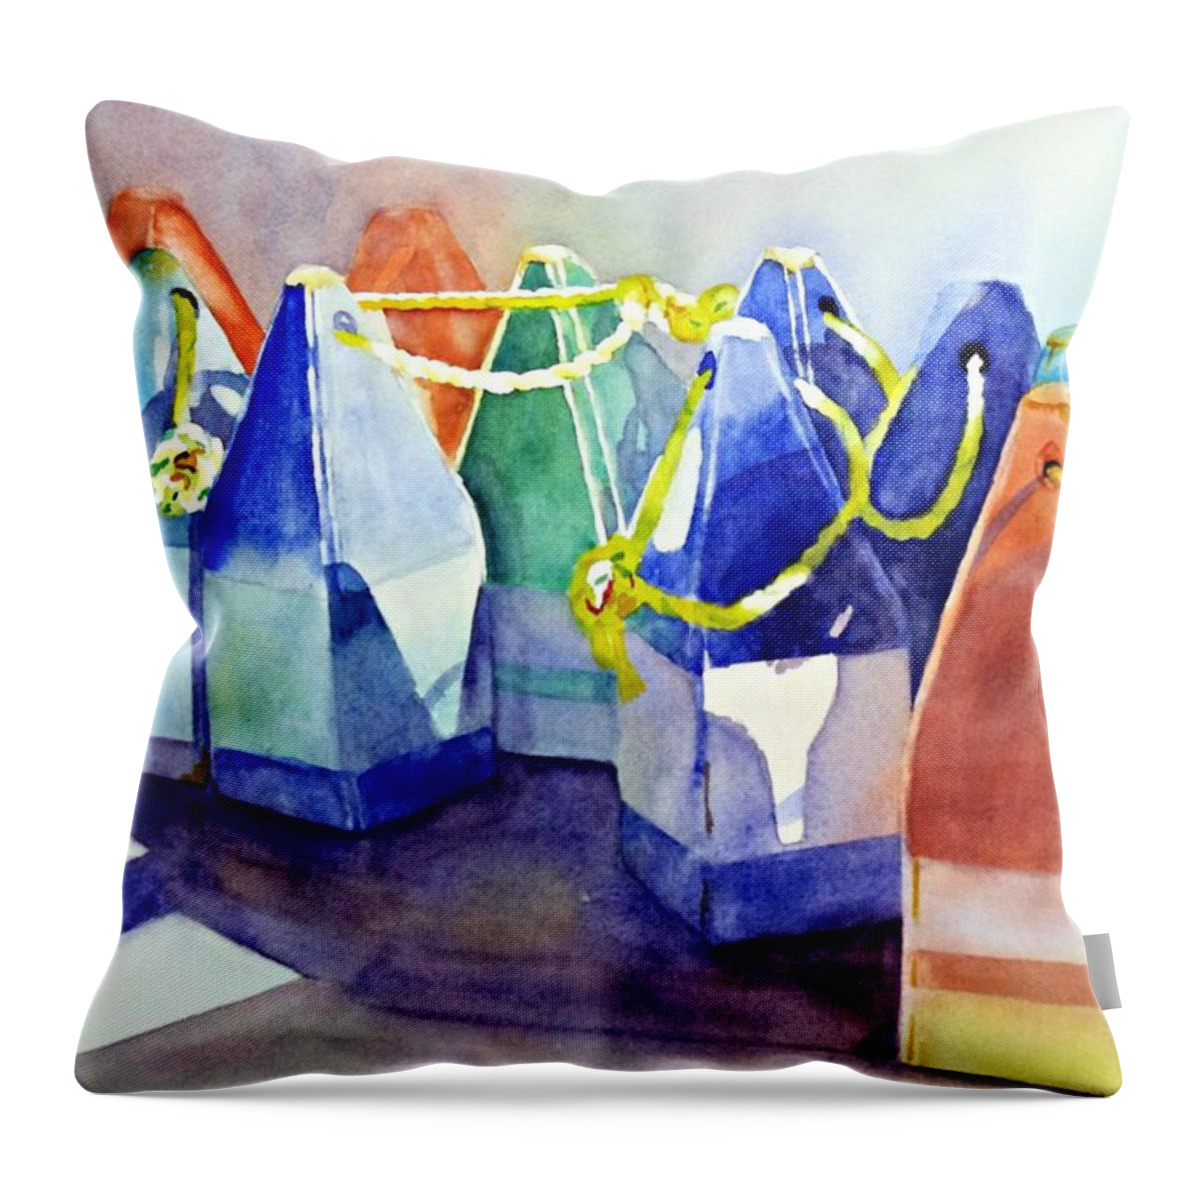 Sea Throw Pillow featuring the painting Buoys by Beth Fontenot